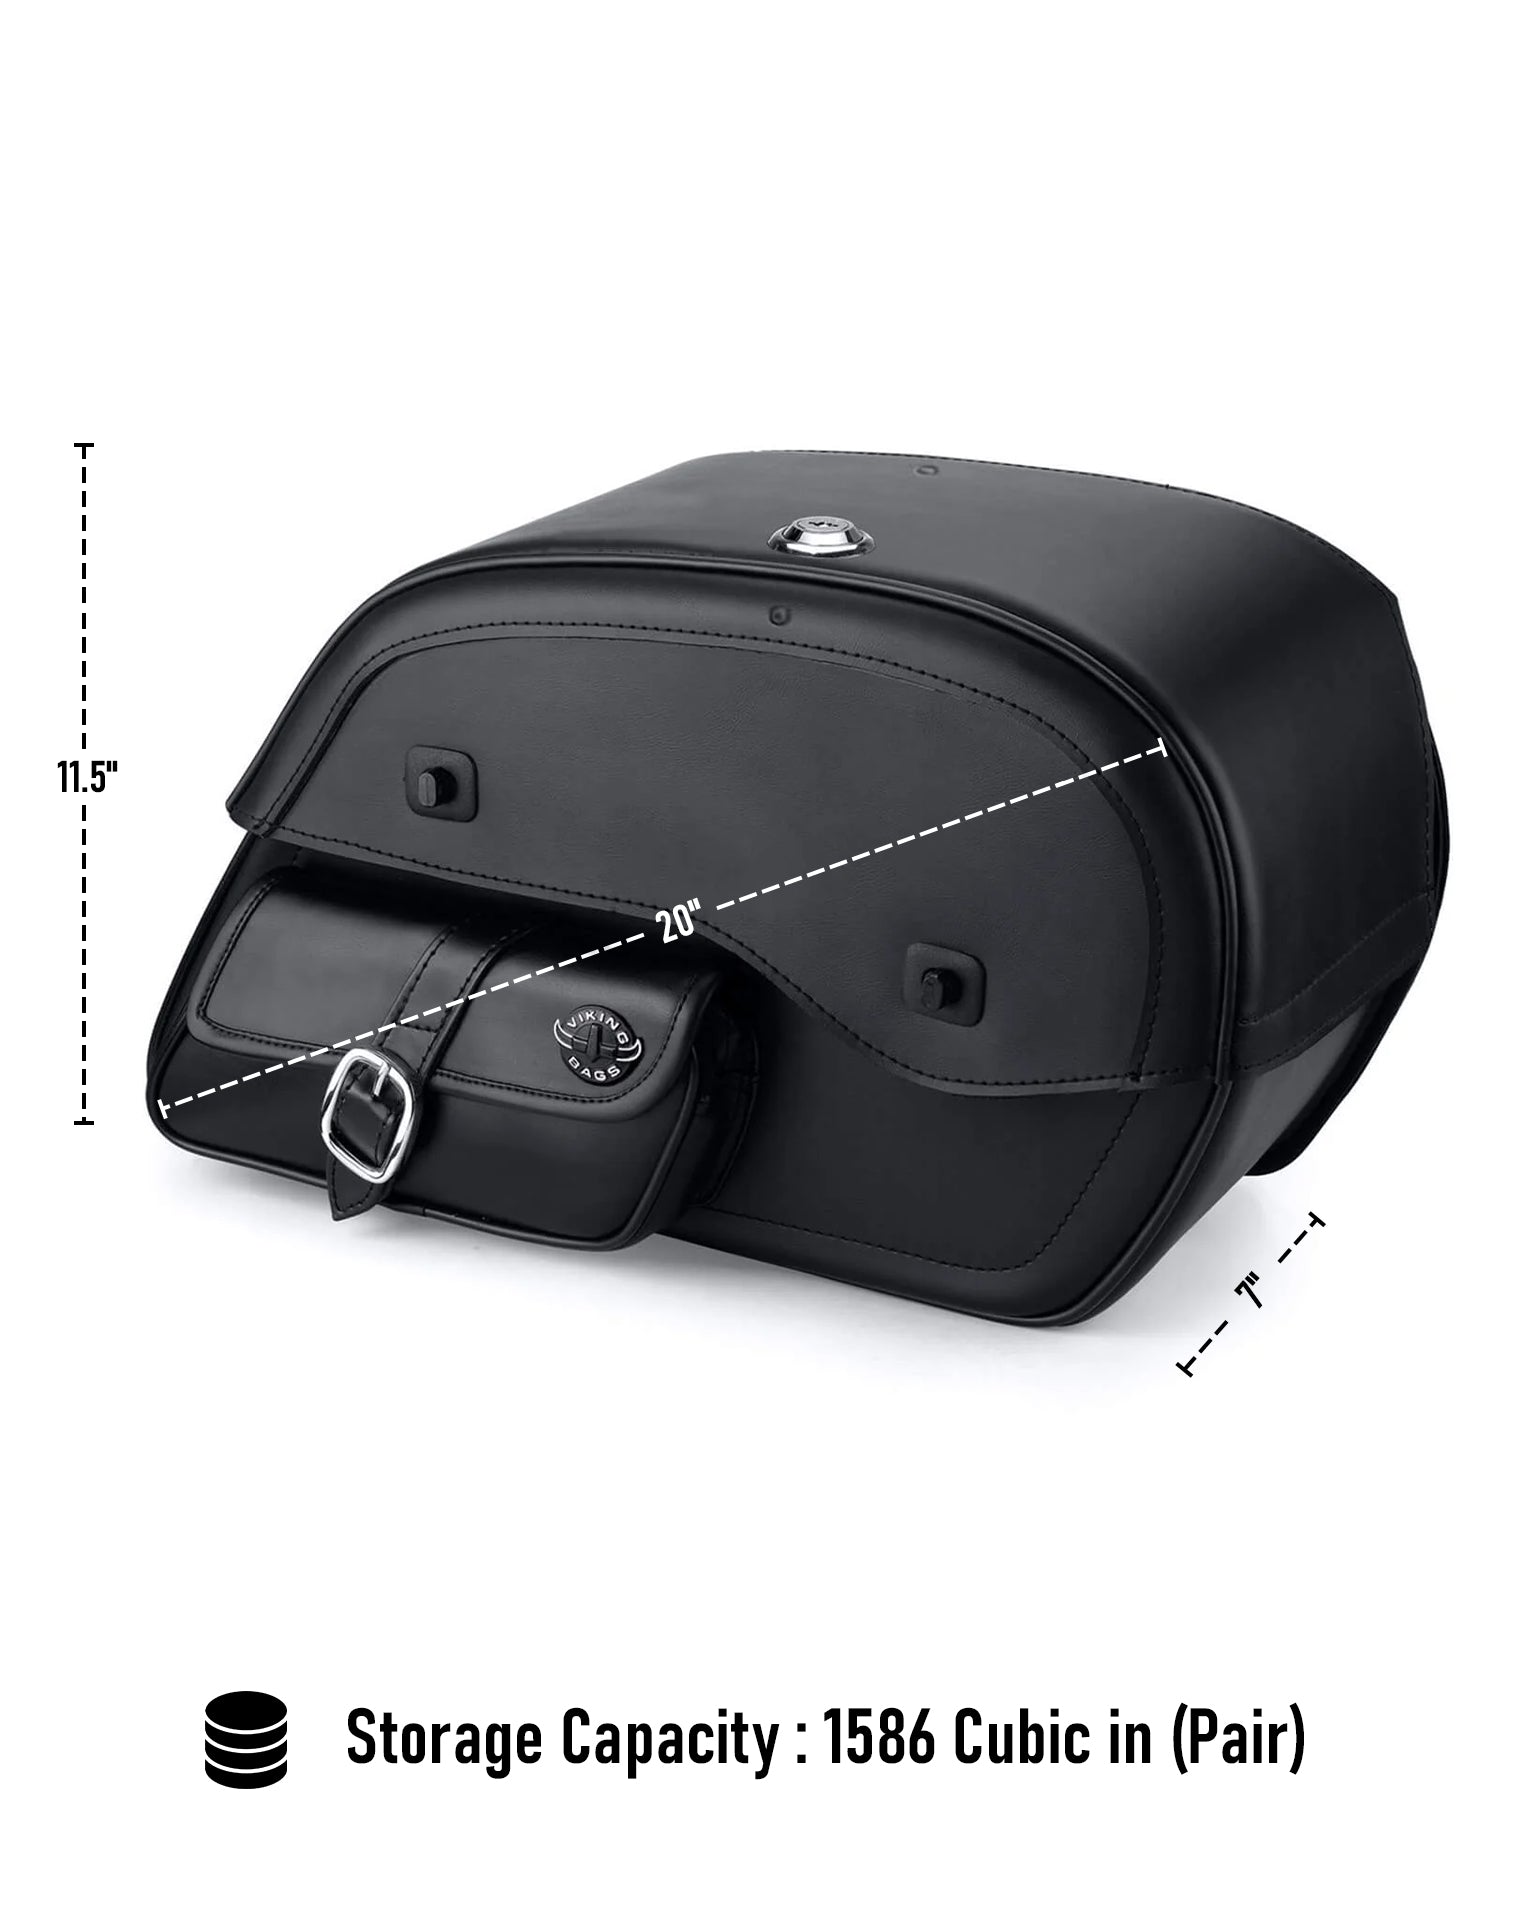 Viking Essential Side Pocket Large Shock Cutout Leather Motorcycle Saddlebags For Harley Sportster 1200 Iron Xl1200Ns Can Store Your Ridings Gears